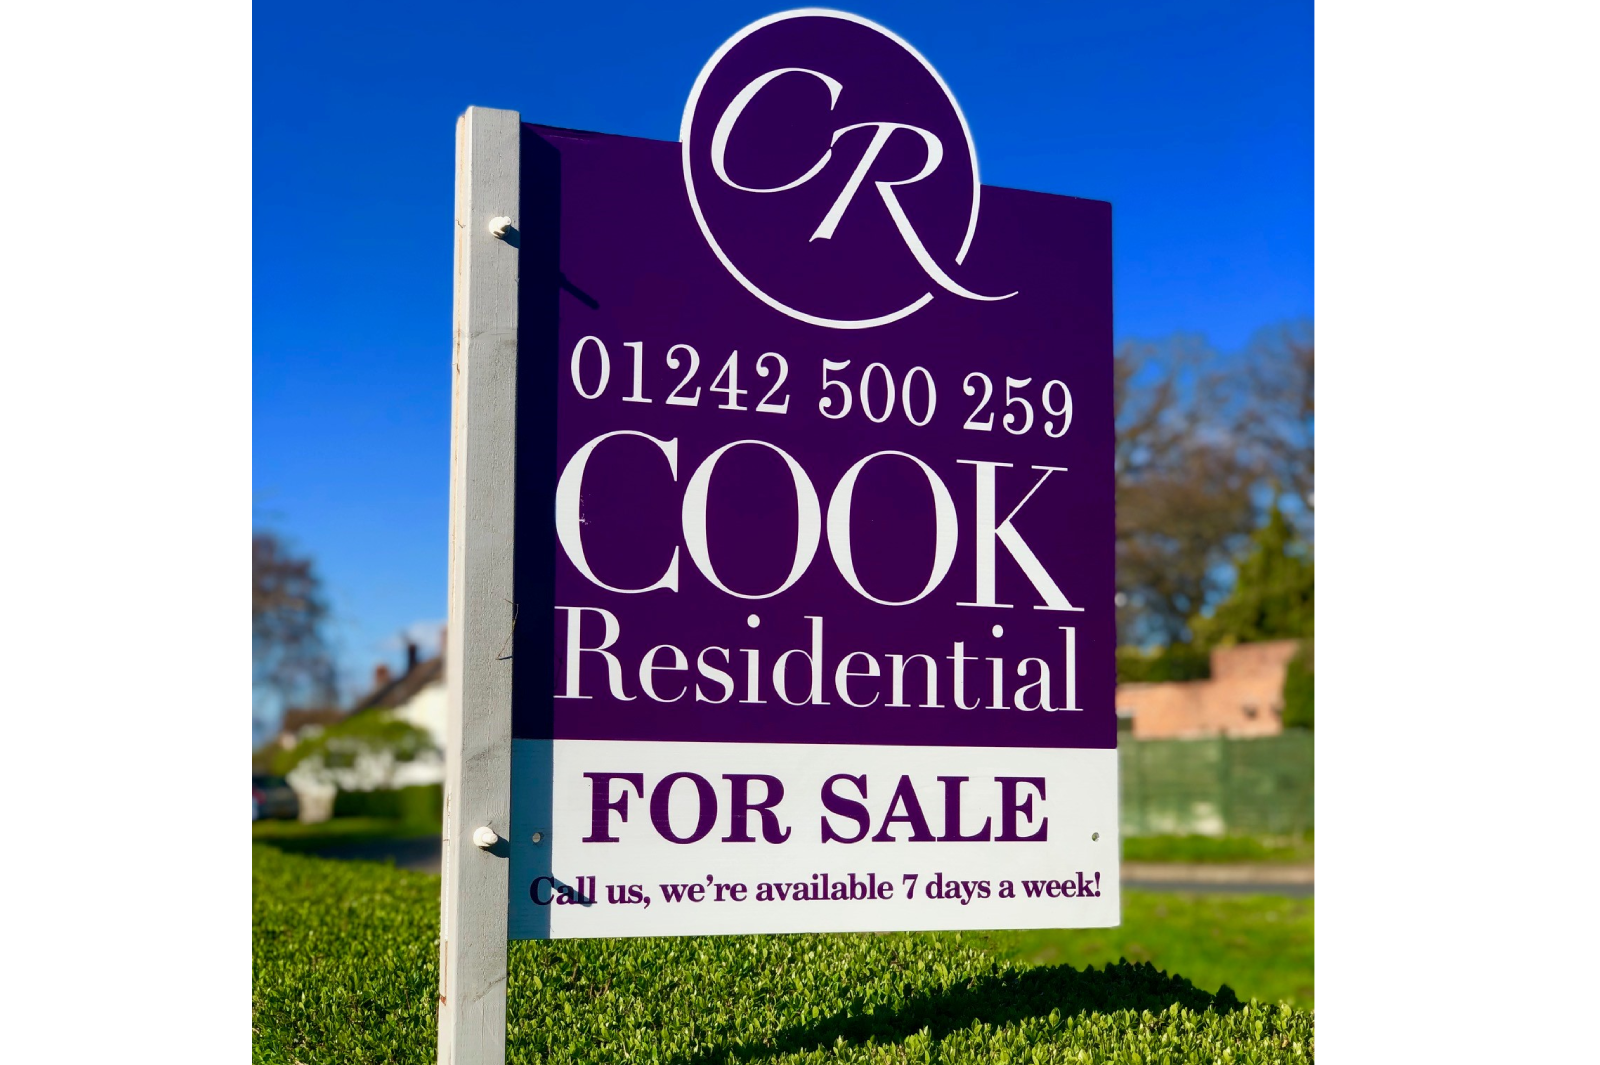 Cook Residential